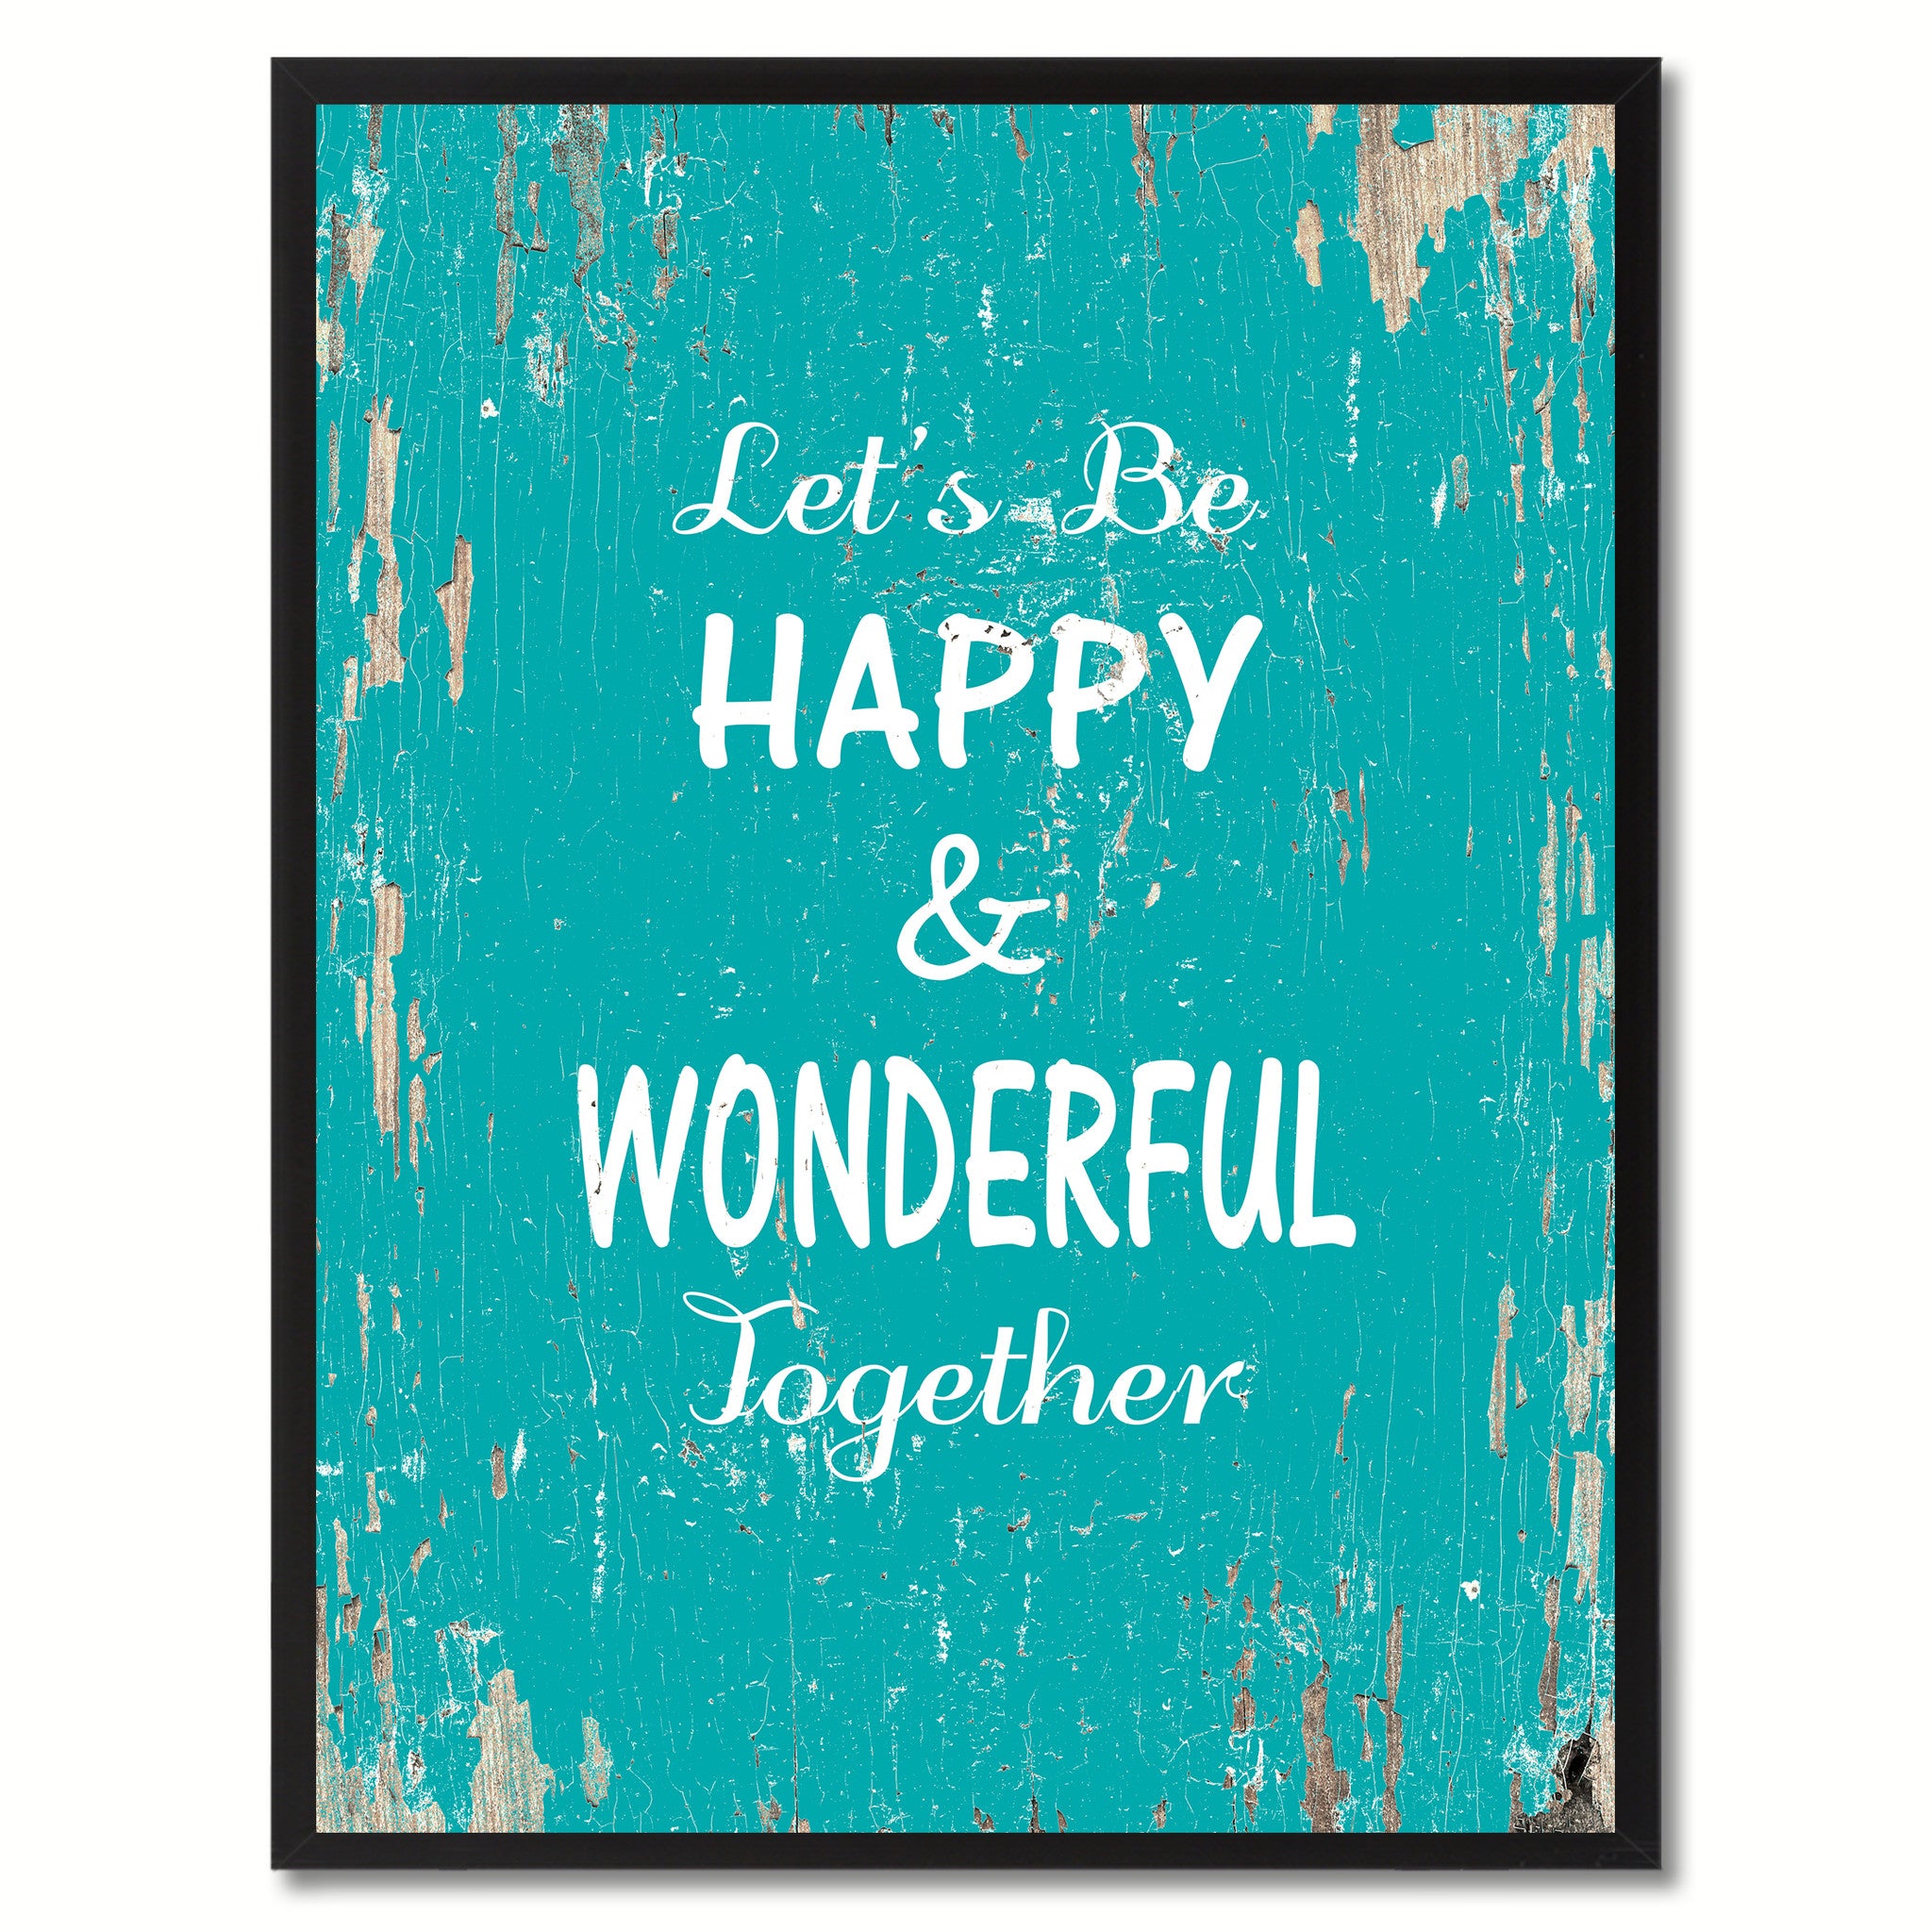 Let's Be Happy & Wonderful Together Saying Canvas Print, Black Picture Frame Home Decor Wall Art Gifts